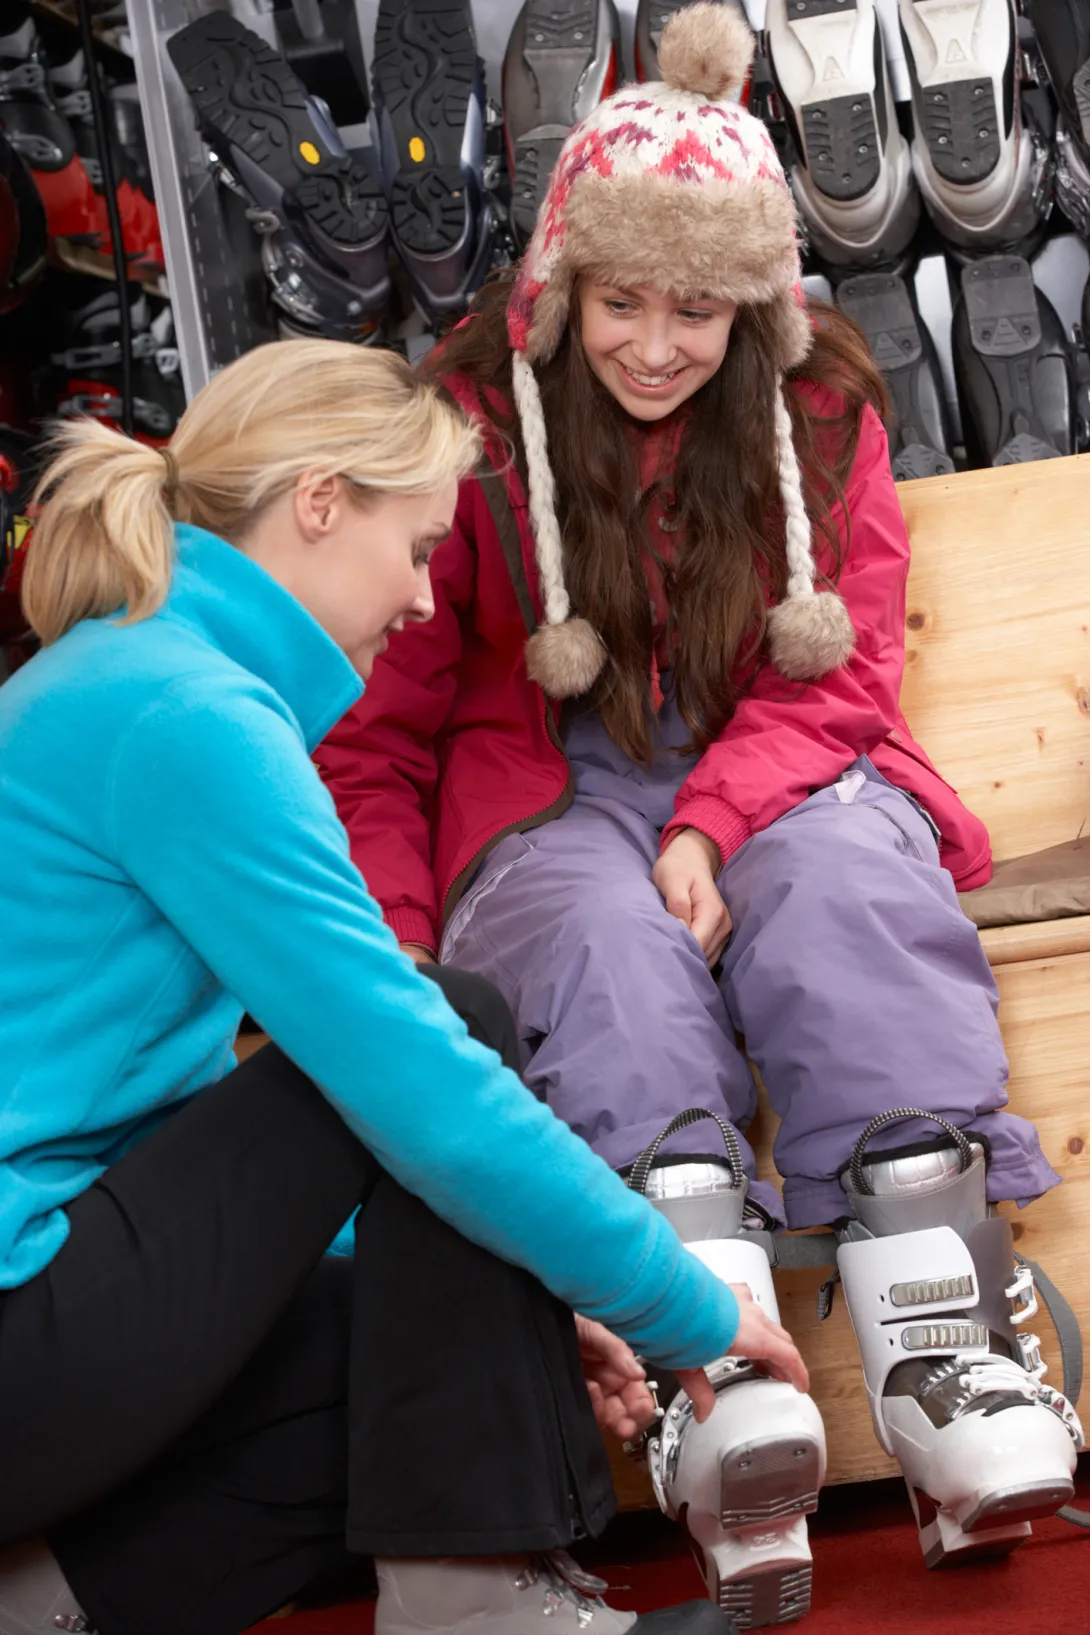 Trying on a ski boot